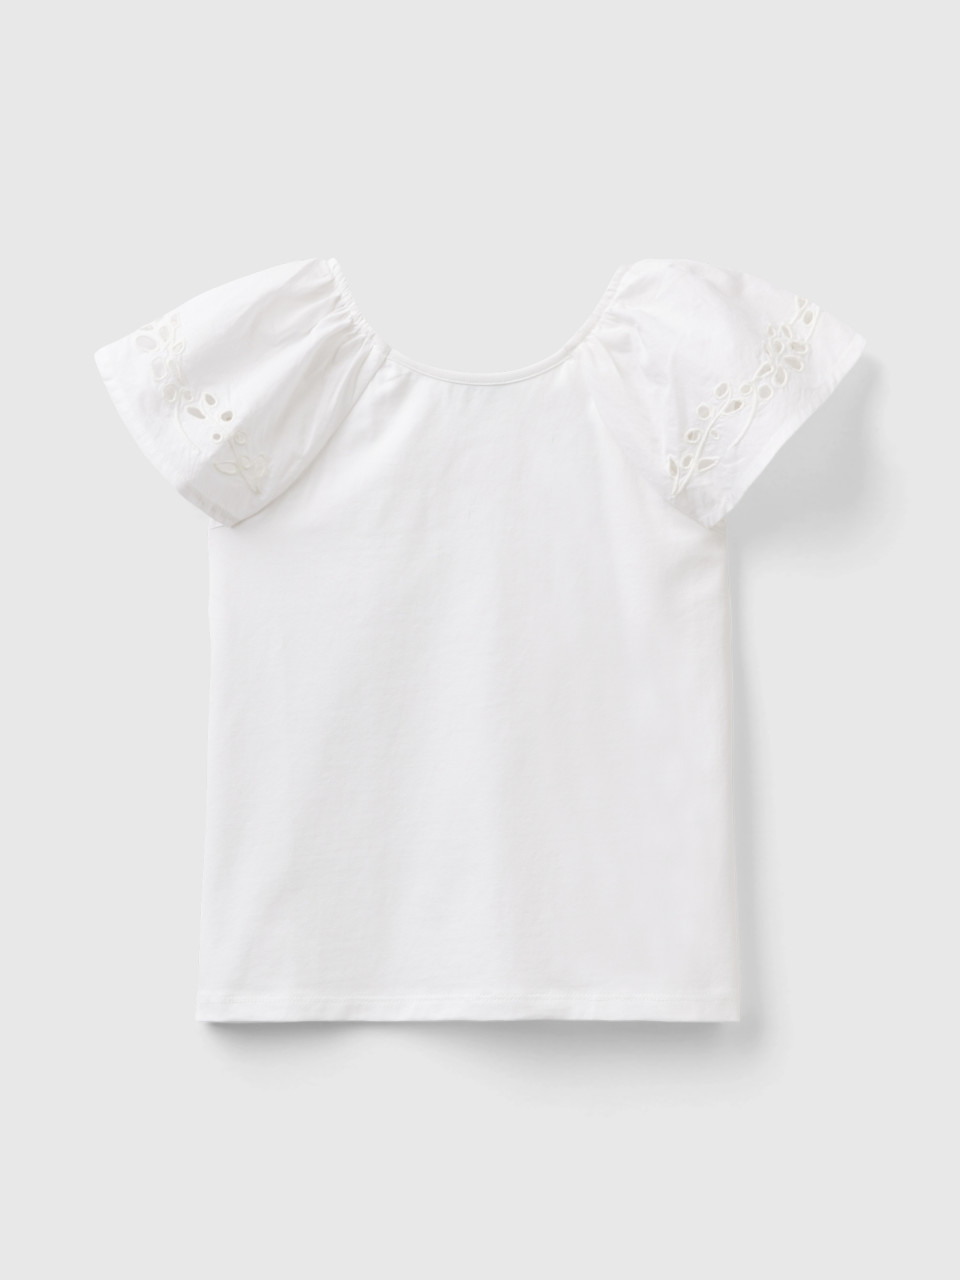 Benetton, Top With Embroidered Sleeves, White, Kids